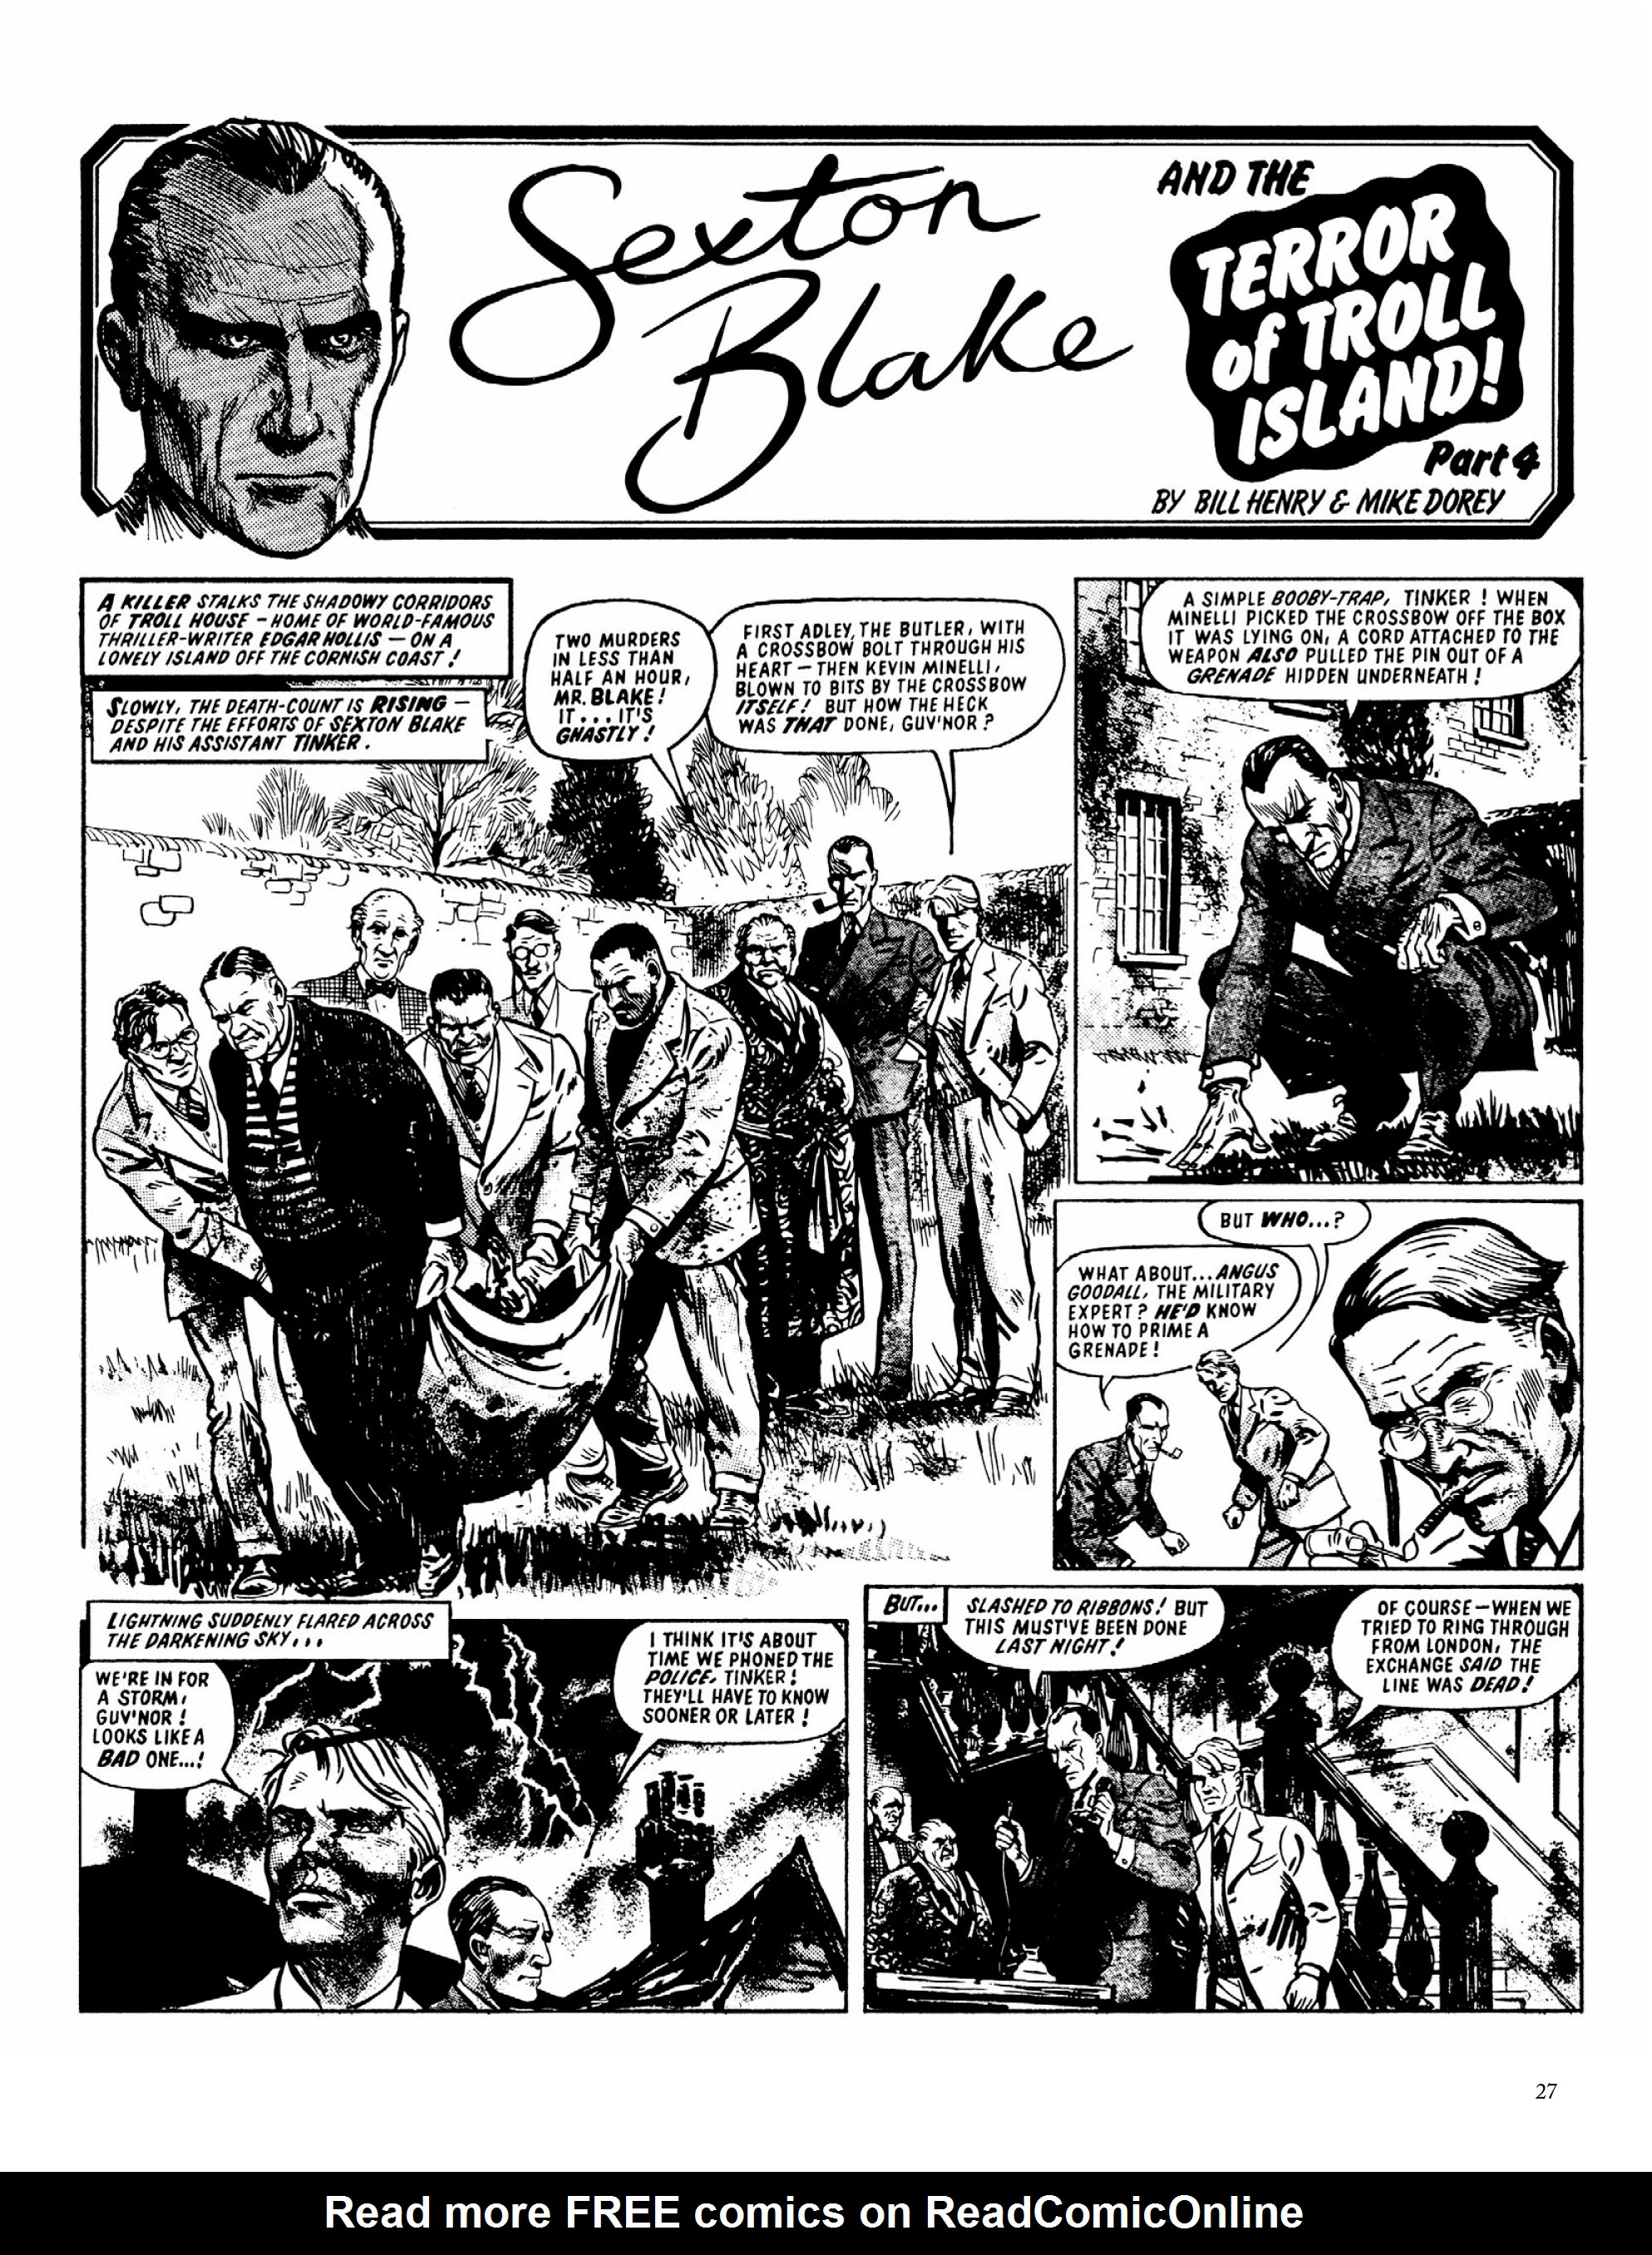 Read online The Return of Sexton Blake comic -  Issue # TPB - 29